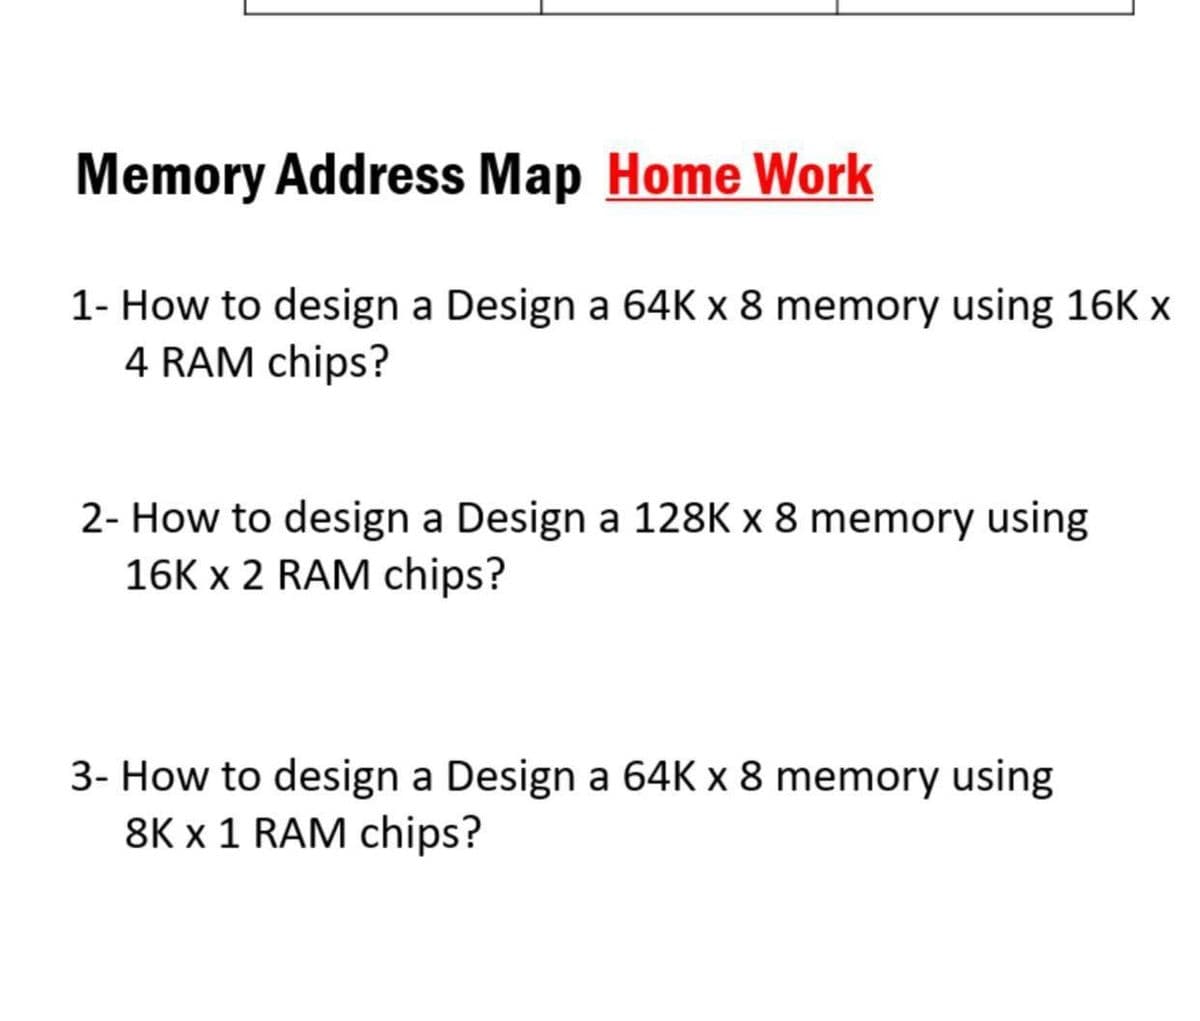 Memory Address Map Home Work
1- How to design a Design a 64K x 8 memory using 16K x
4 RAM chips?
2- How to design a Design a 128K x 8 memory using
16K x 2 RAM chips?
3- How to design a Design a 64K x 8 memory using
8K x 1 RAM chips?
